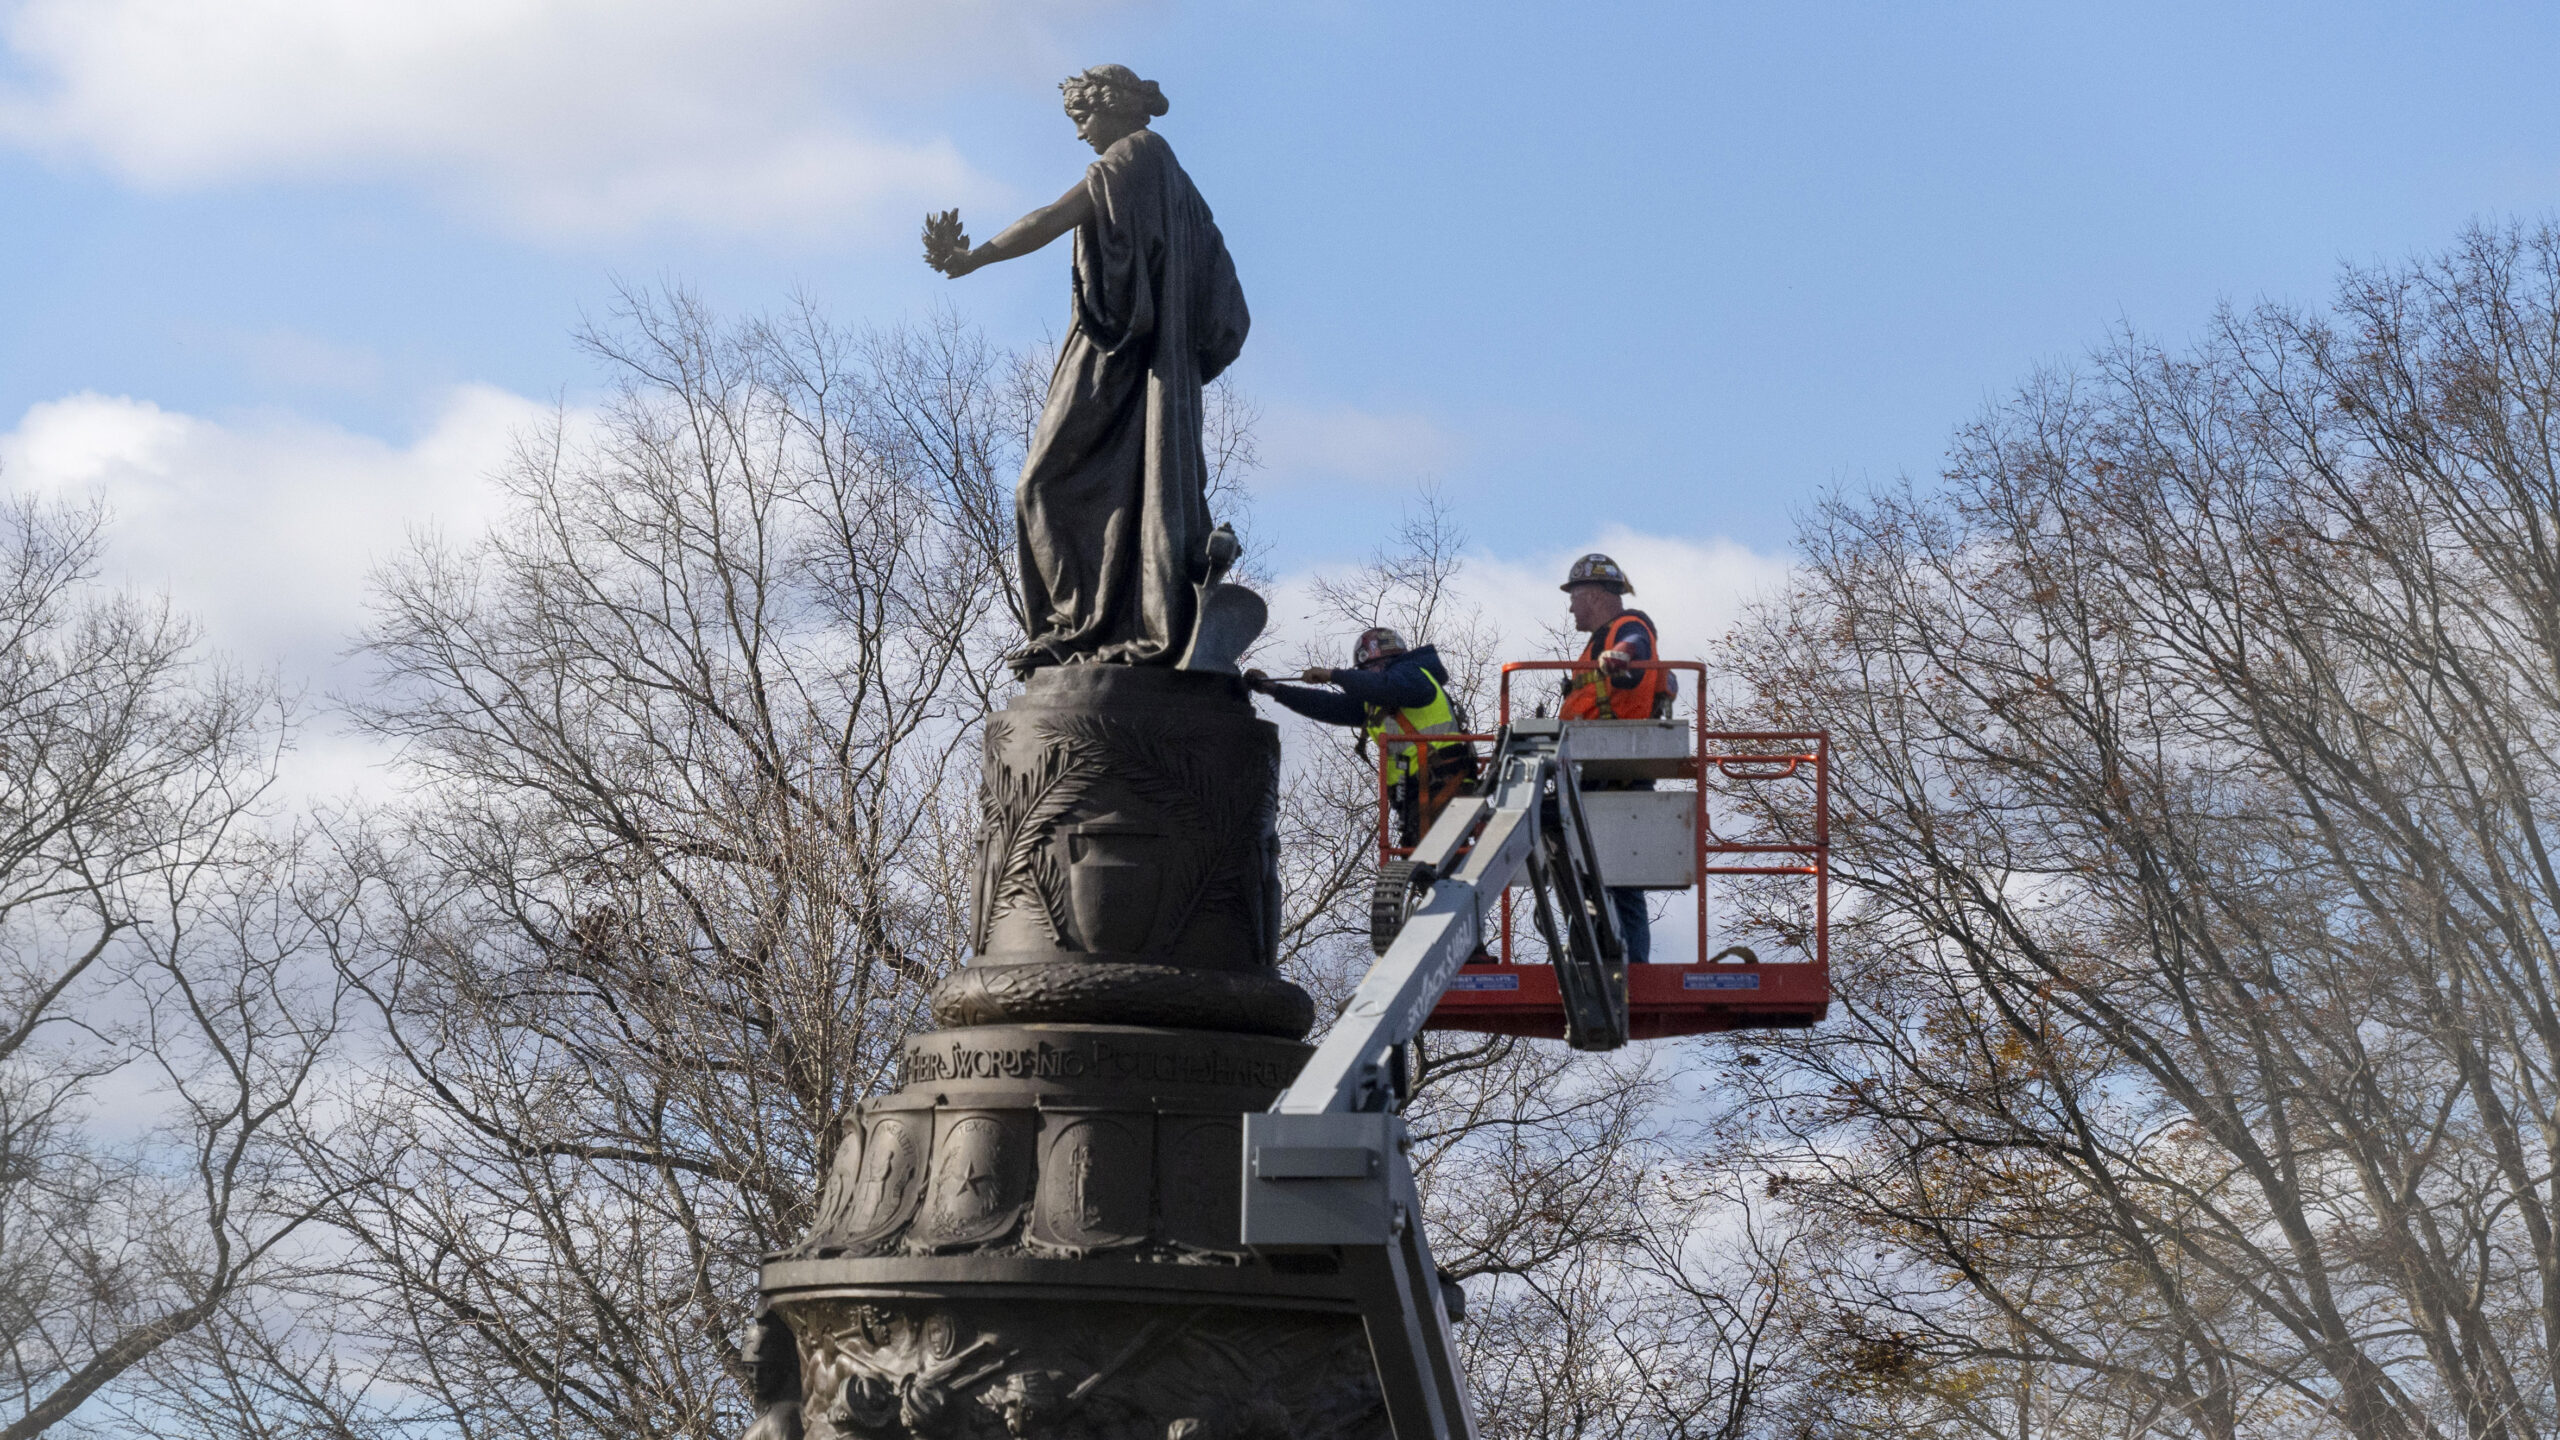 Judge allows the removal of a Confederate memorial at Arlington Cemetery